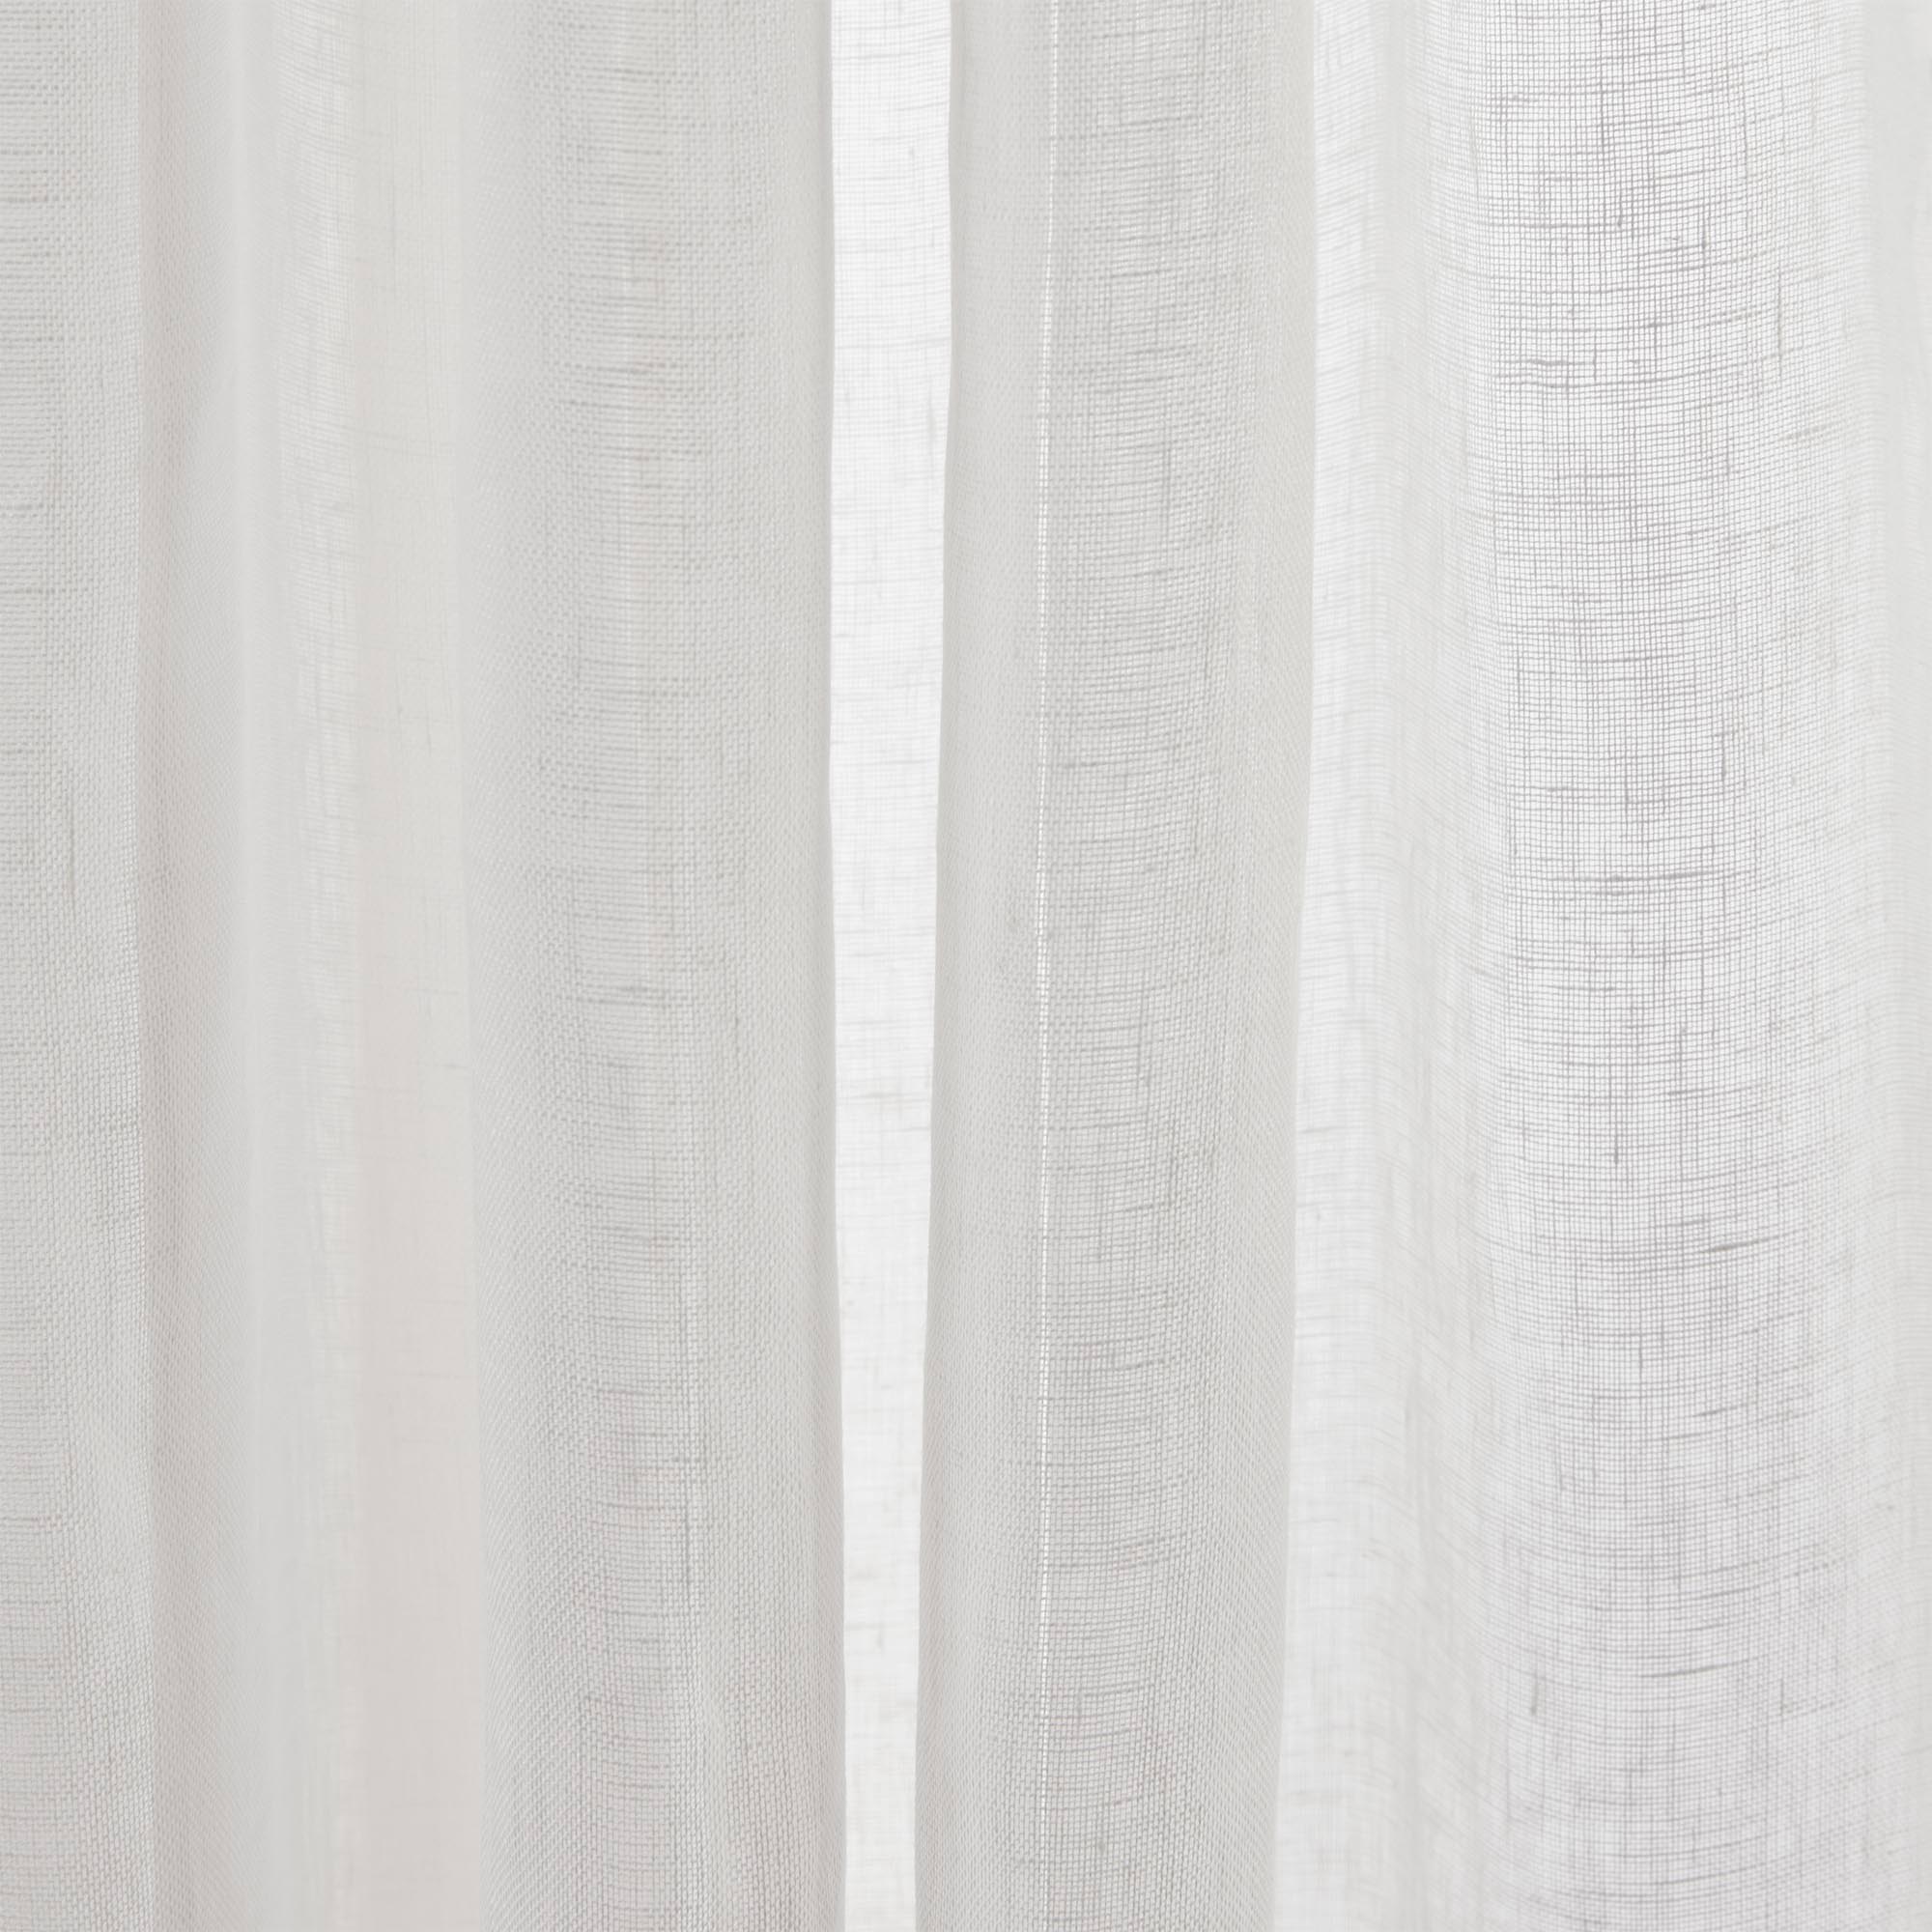 Shadow white and black bourdon stitch panel sheer curtain